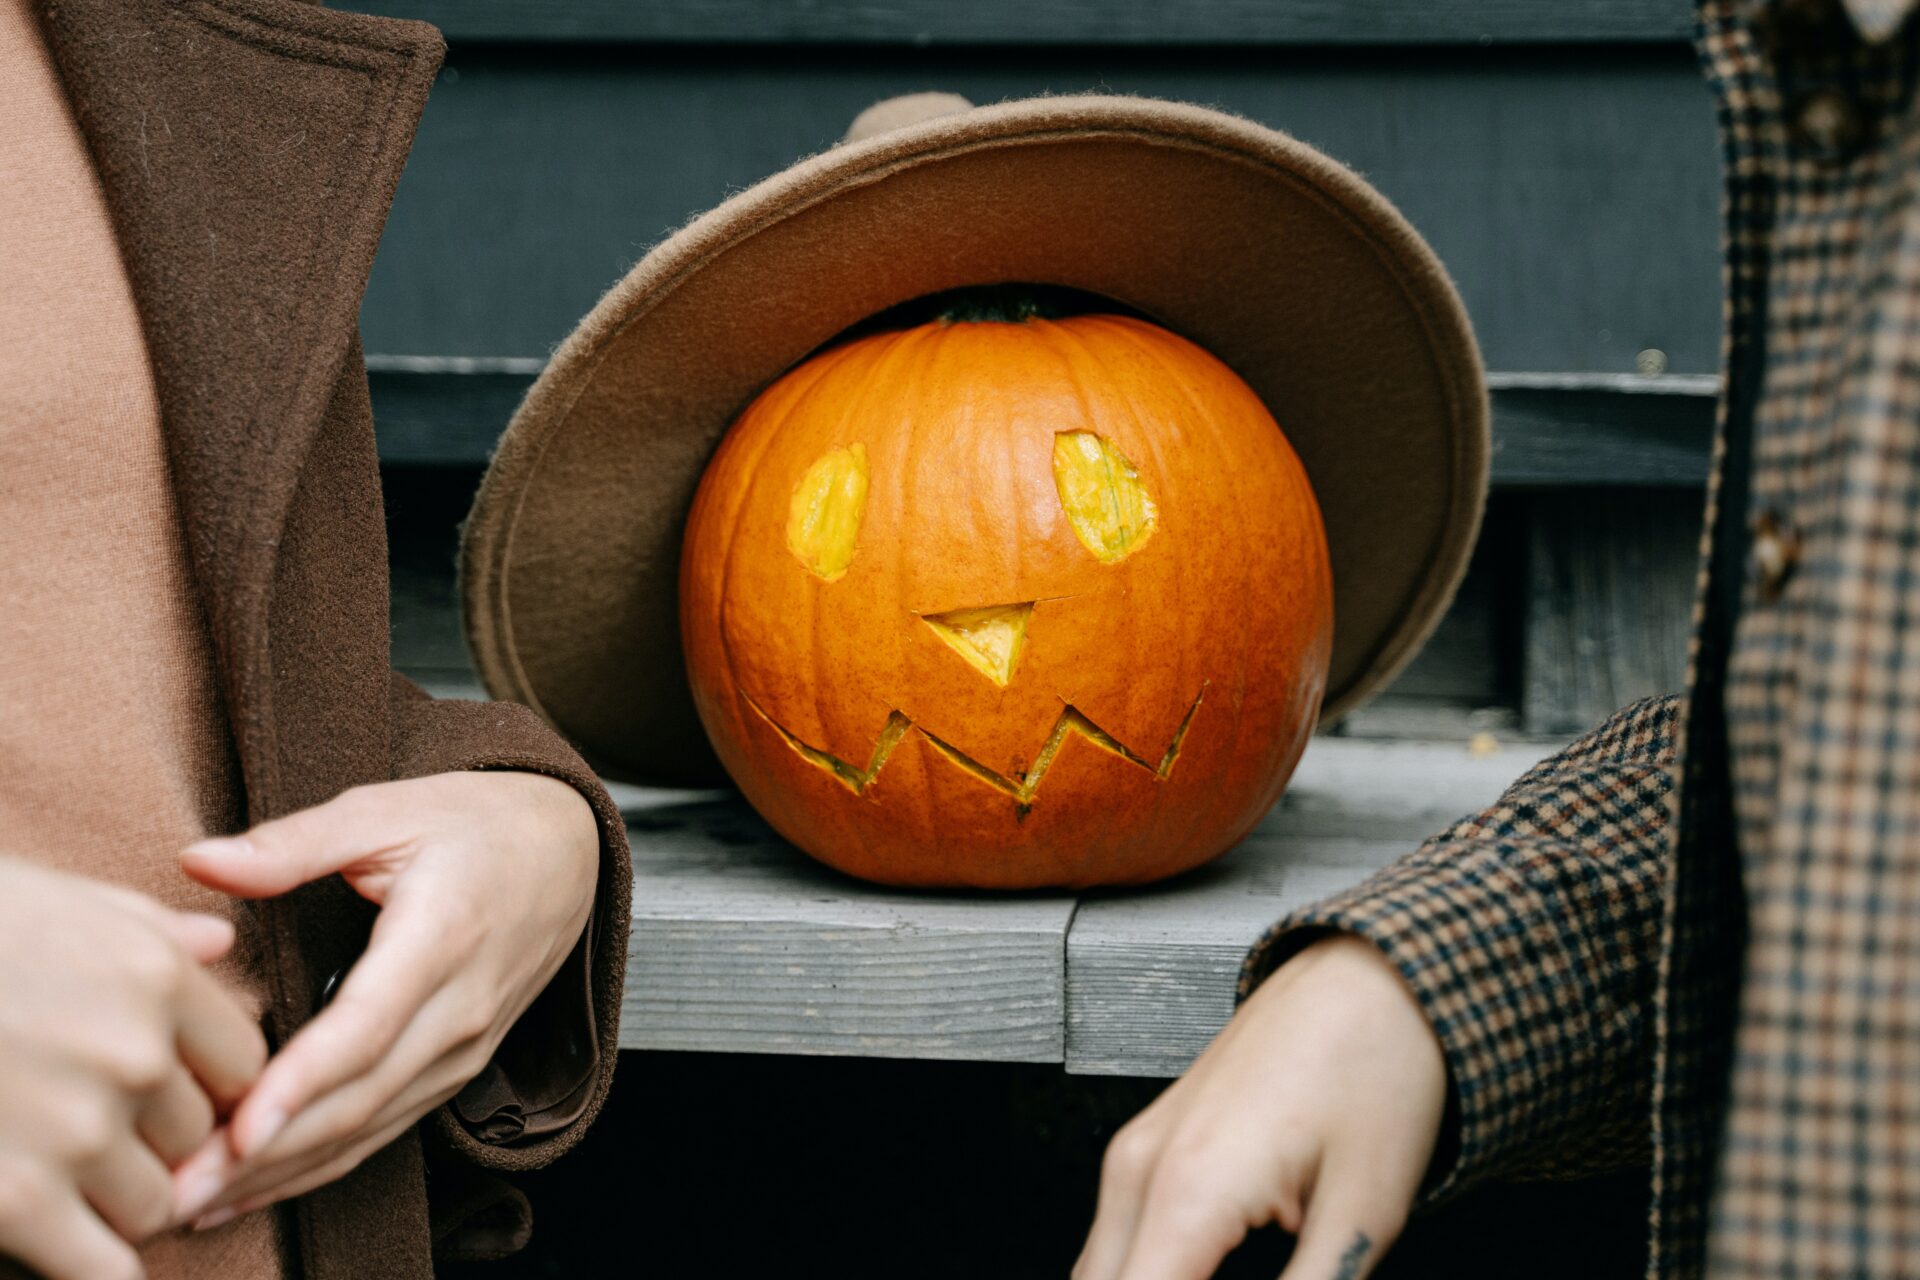 A carved pumpkin with a beige hat on, resting on a wooden surface. In the foreground is a closeup of two people talking, only their hands are shown.